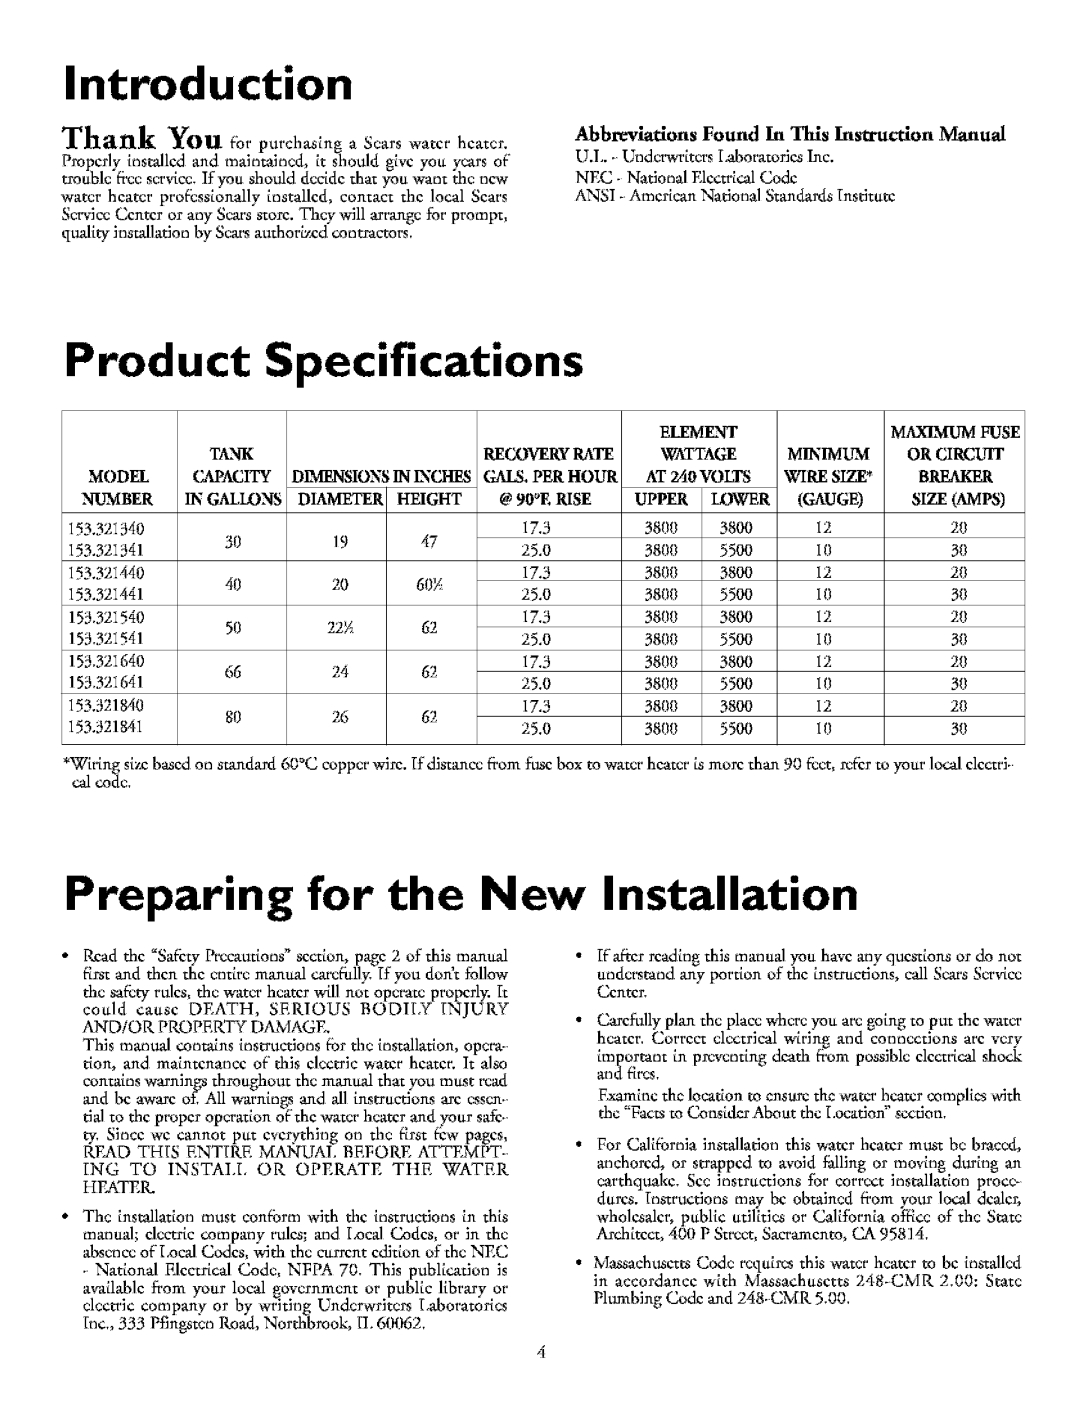 Kenmore 153.321841 Product, Introduction, Preparing for the New, Installation, Thank You forpurchasingScarswatcrhcatcr 